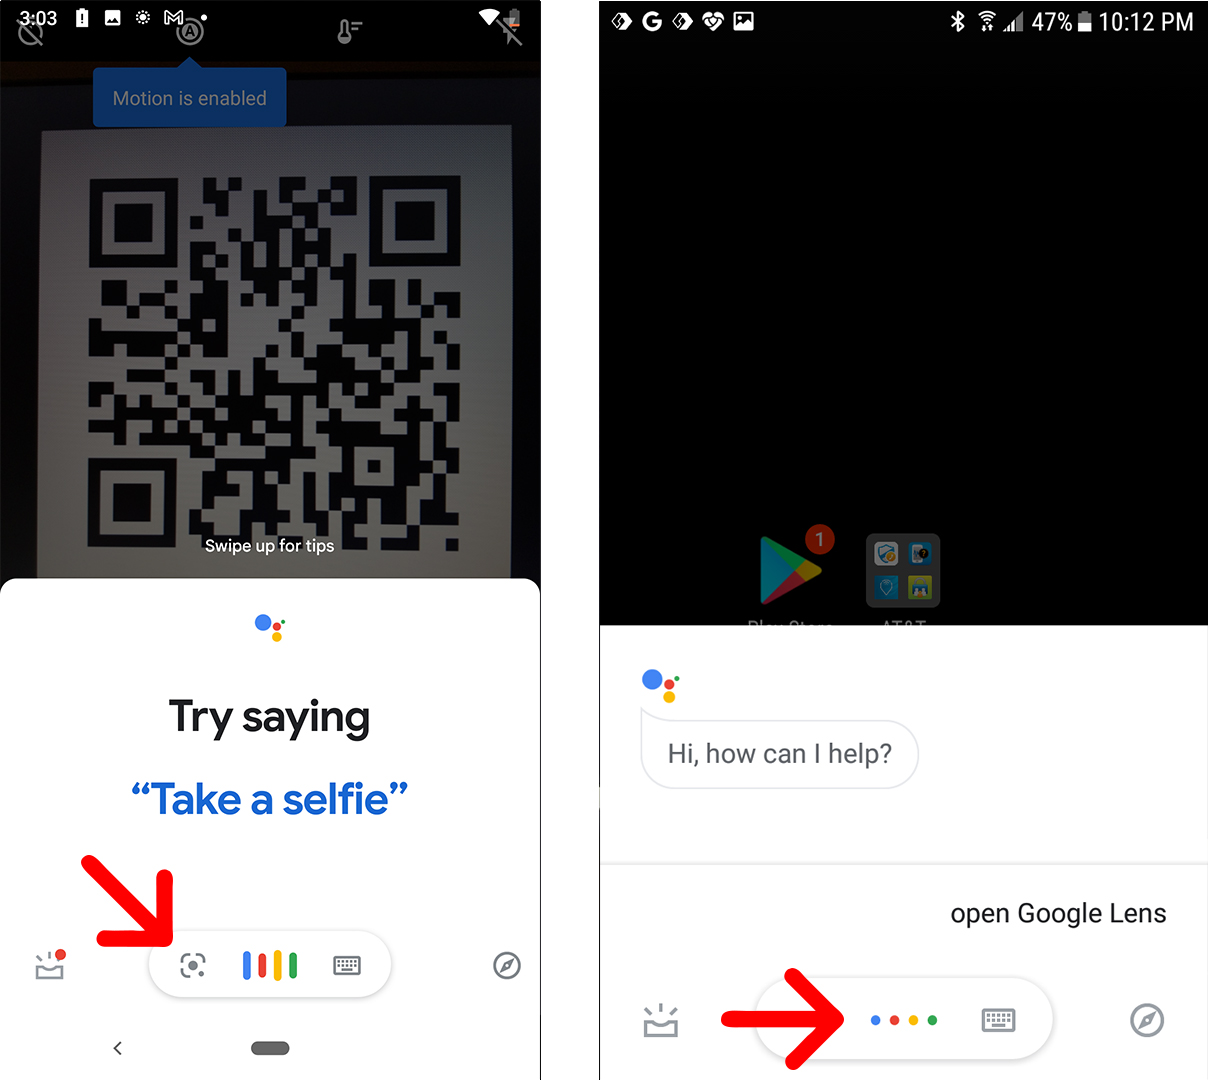 How to scan qr code on Android phone